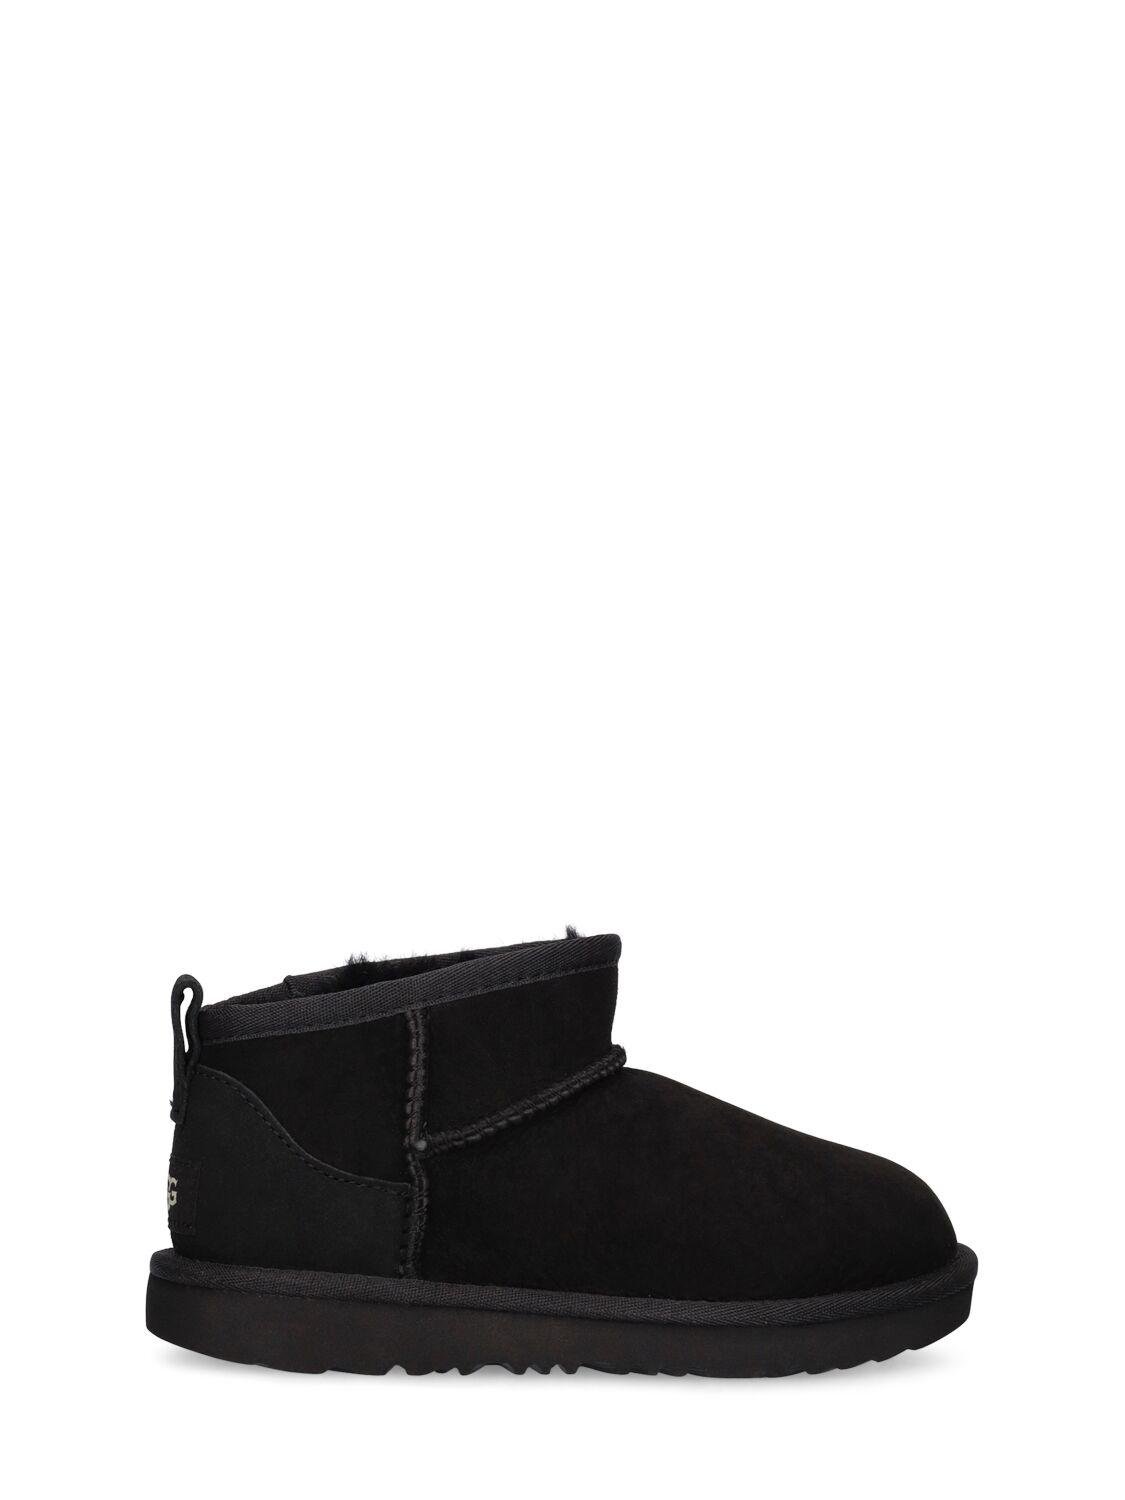 Classic Ultra Mini Shearling Boots by UGG